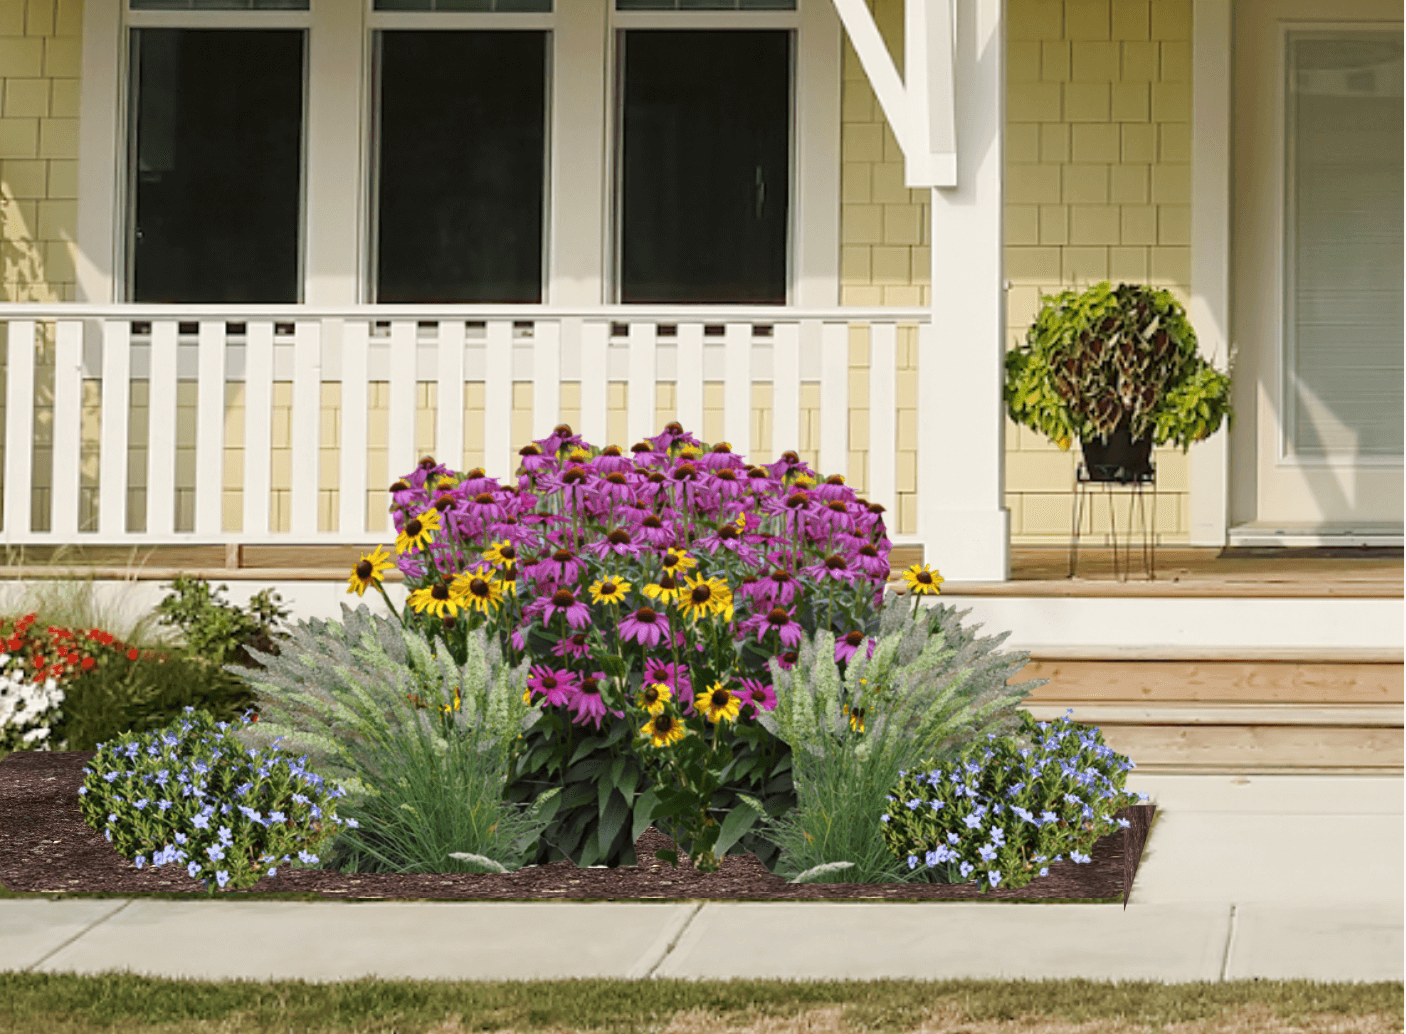 A multicolored garden of native flowers and grasses in front of a yellow house